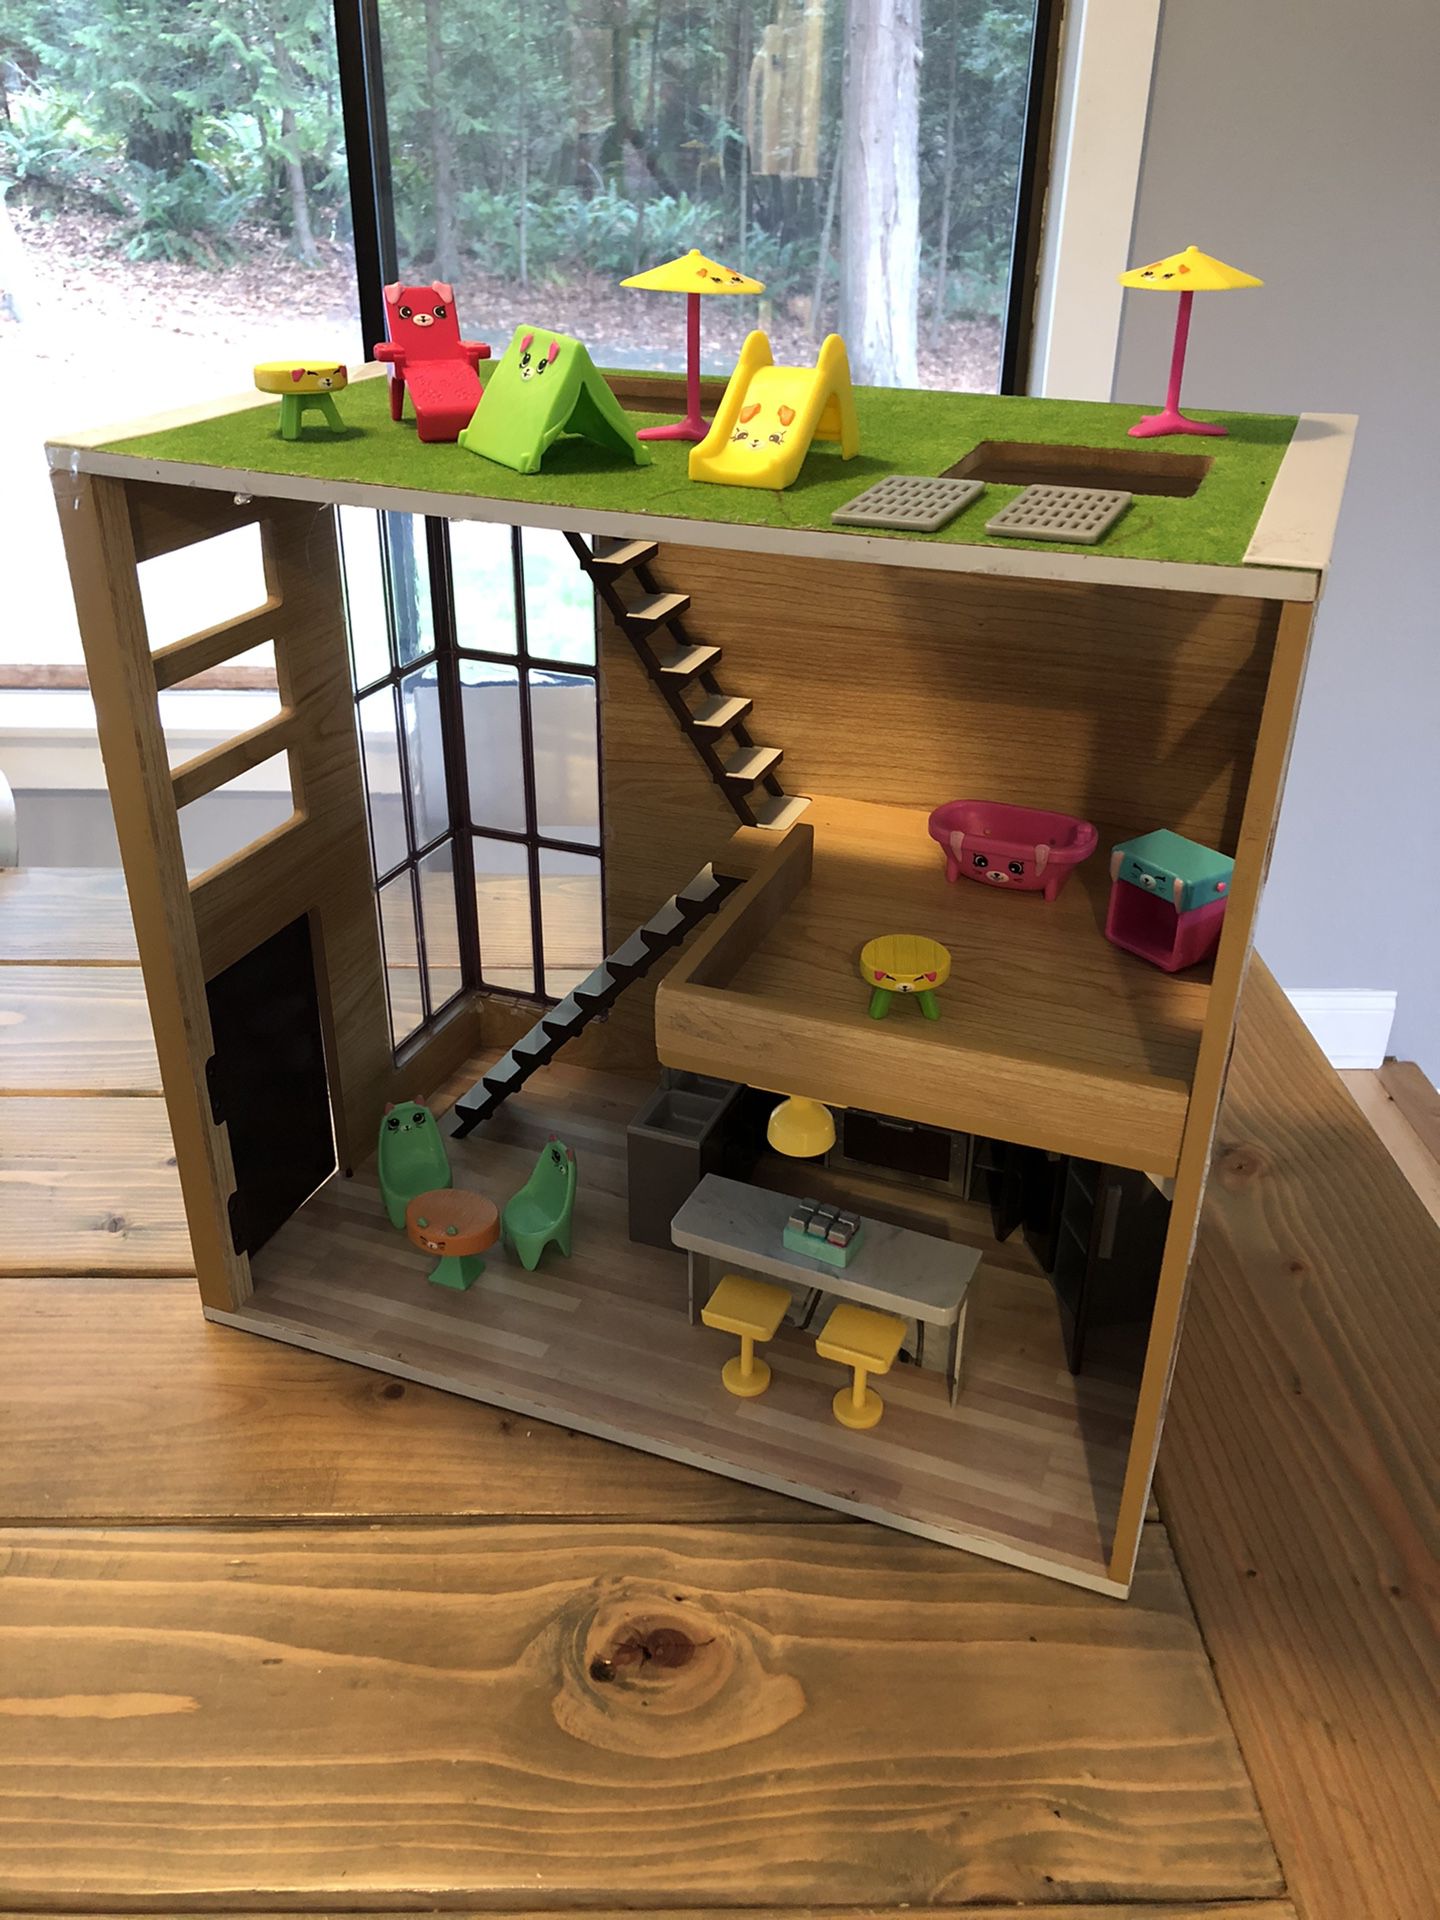 Shopkins Dollhouse with Shopkins Furniture and working lights!